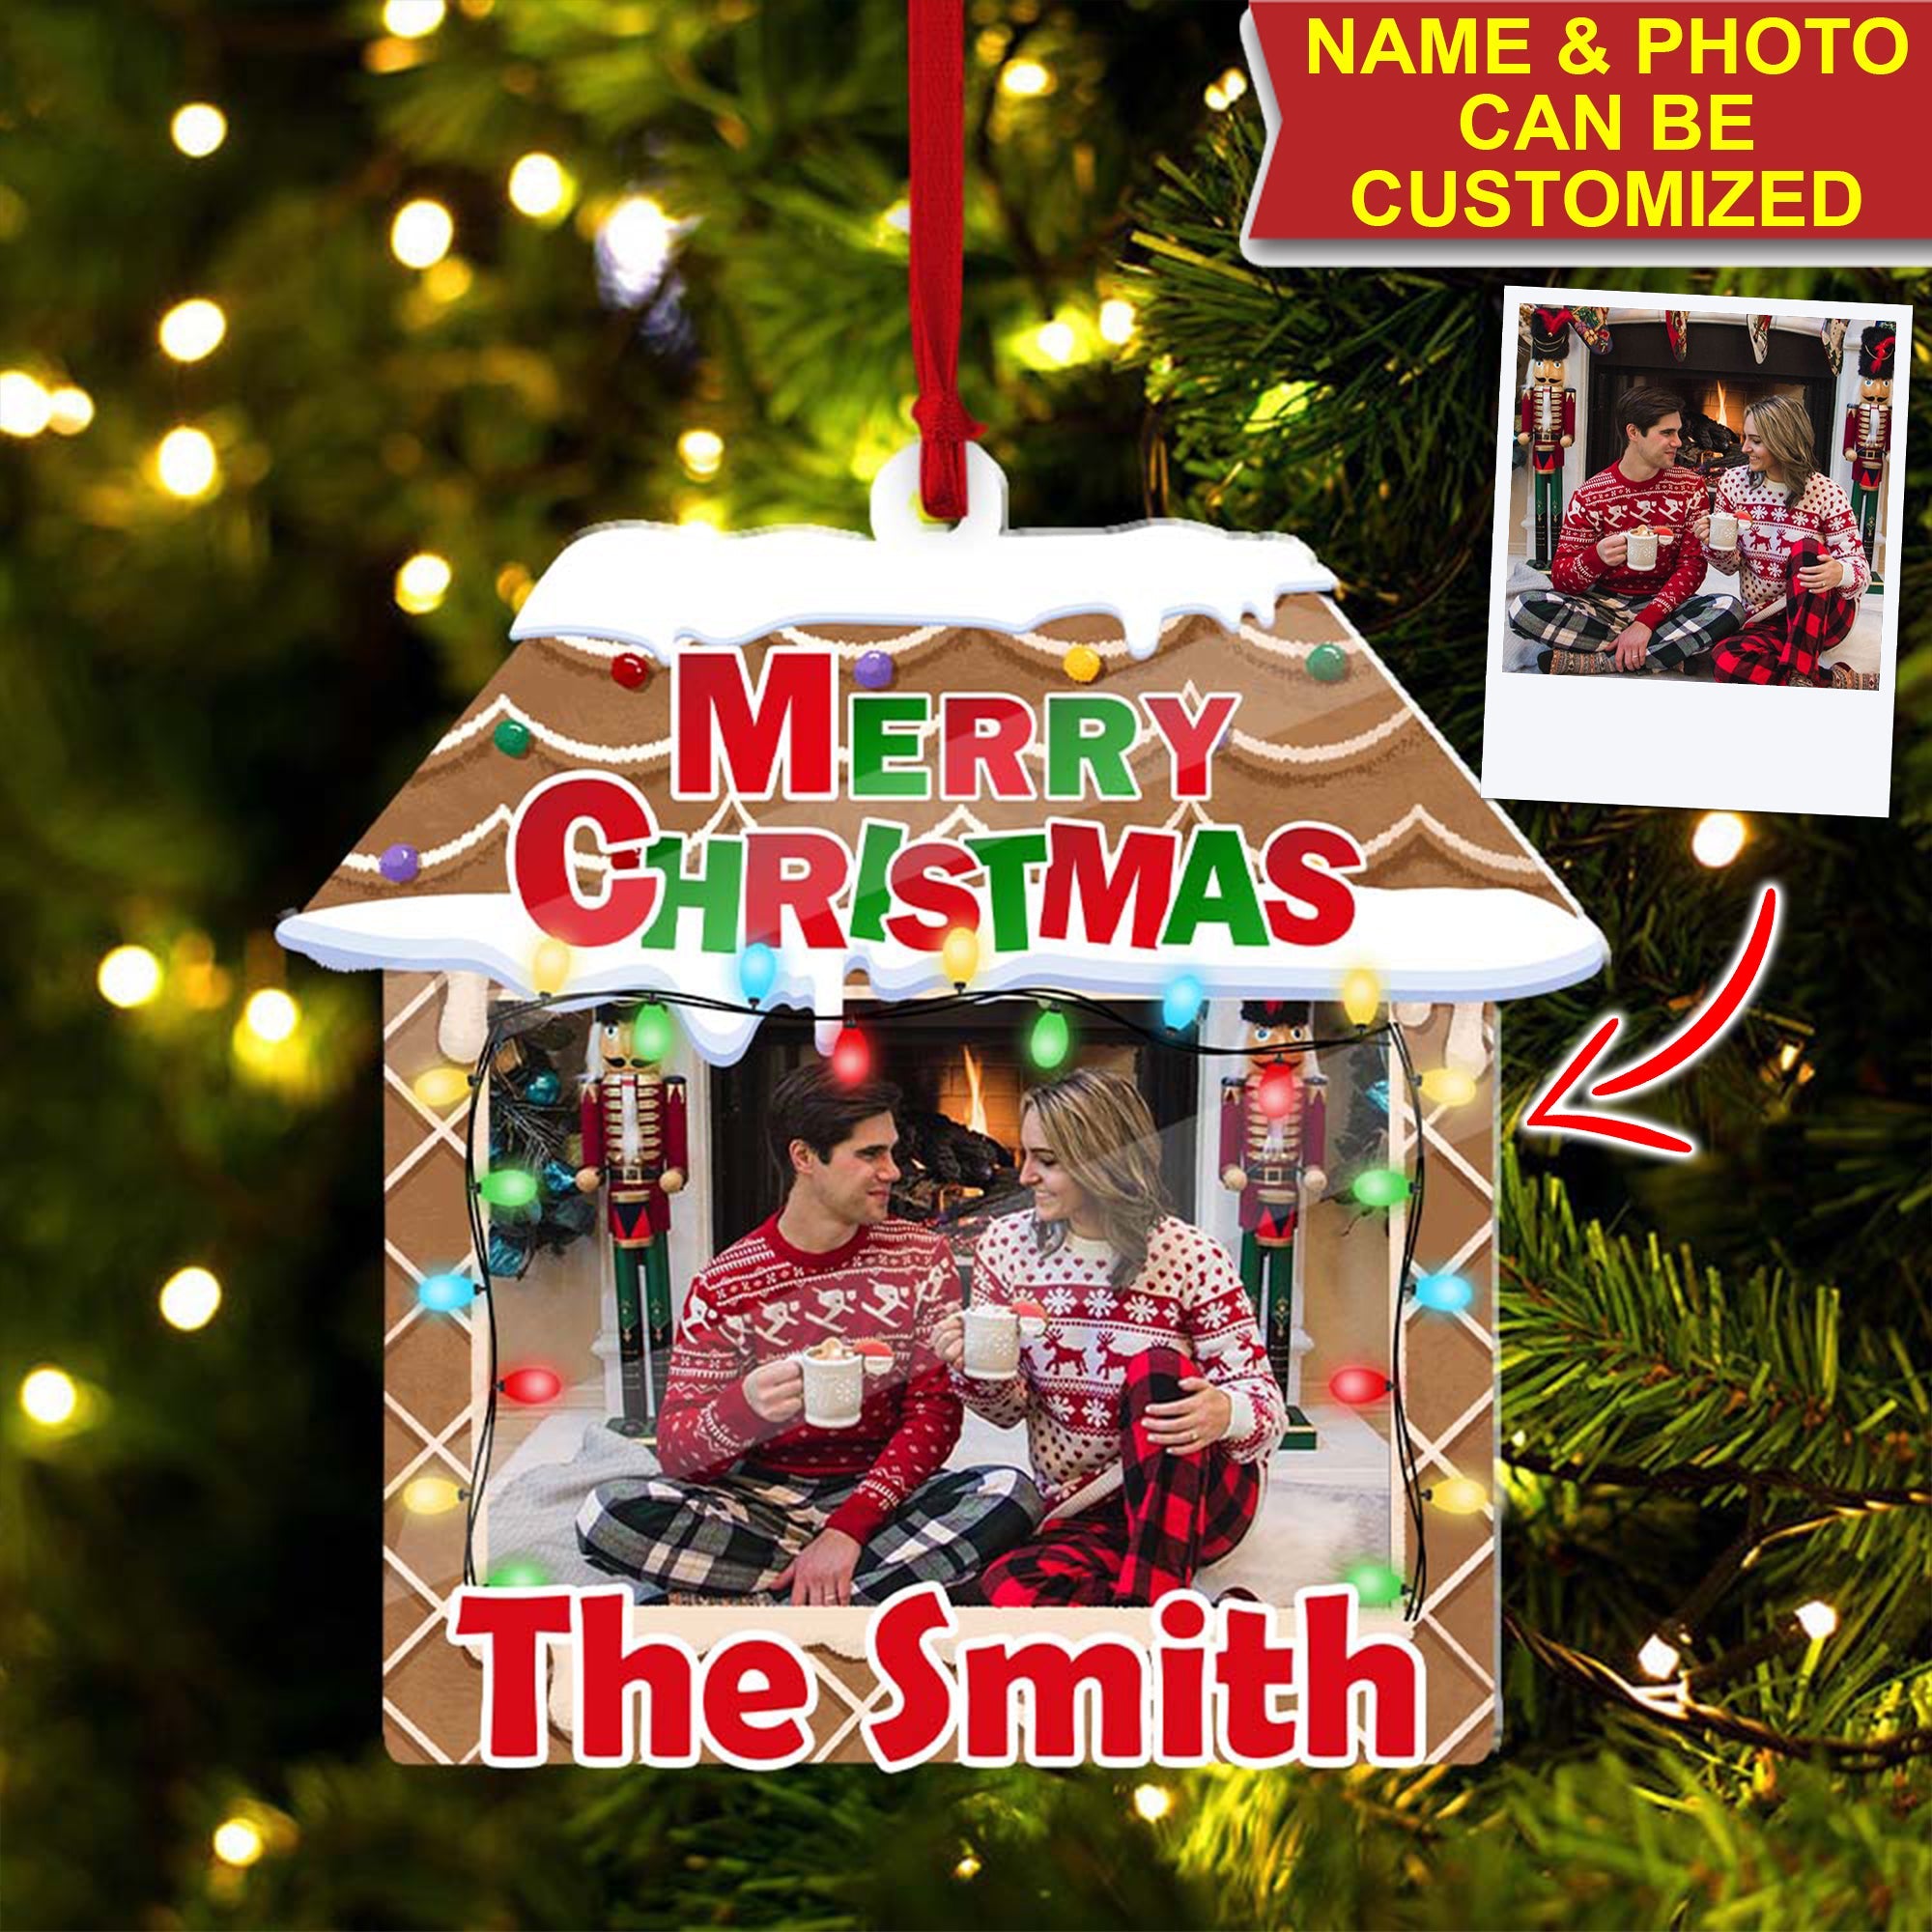 Merry Christmas Family - Gift For  Family - Custom Photo And Name, Personalized Acrylic Ornament